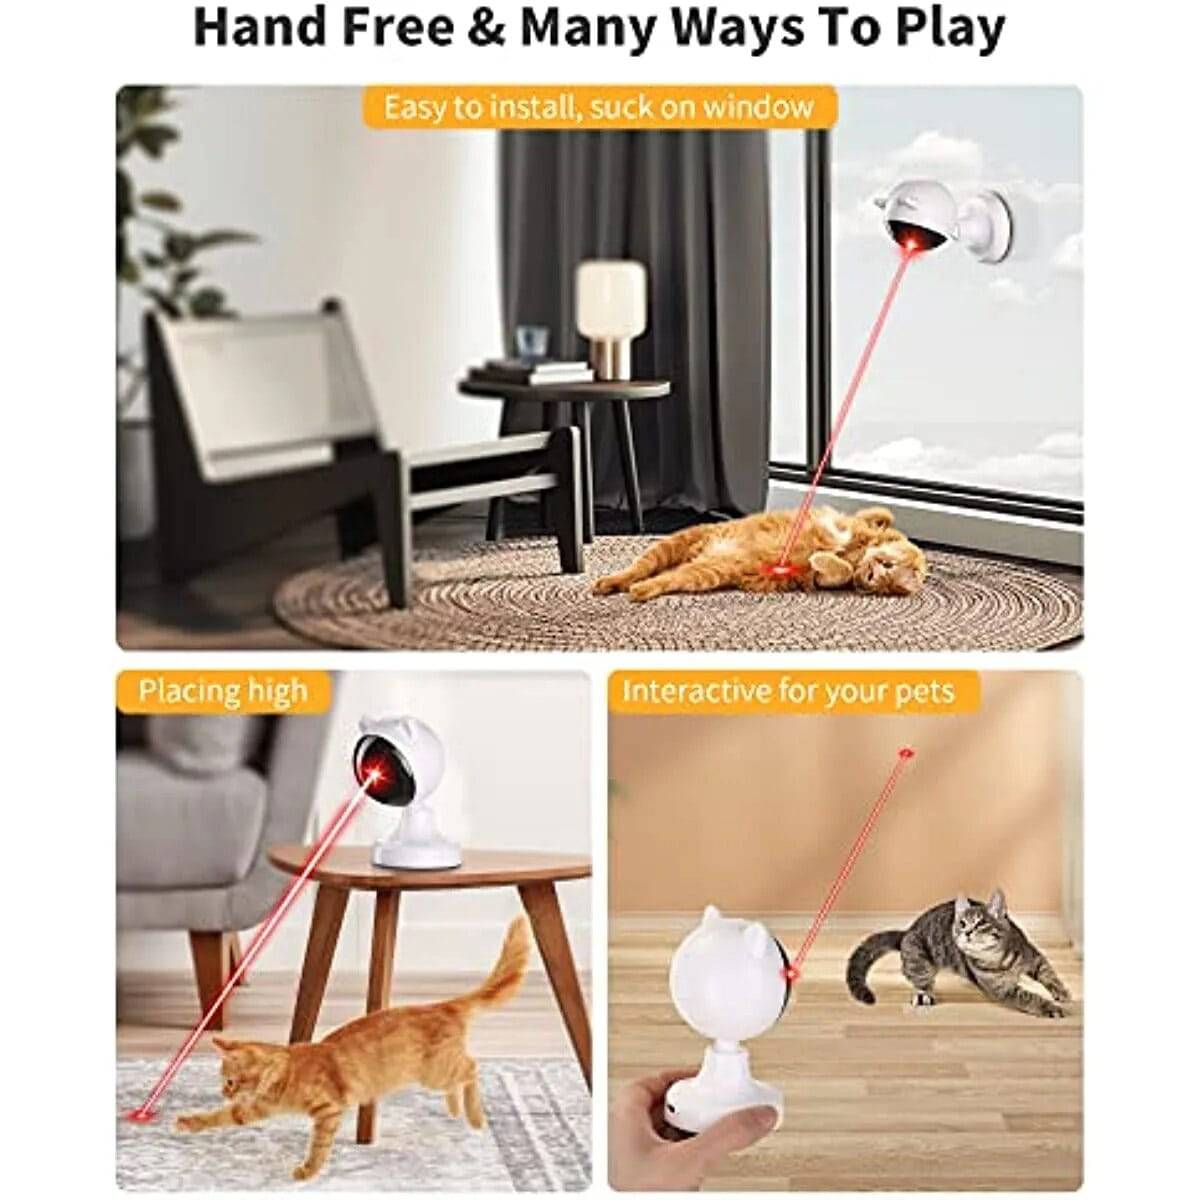 AutoLaser Cat Shaped Toy- USB Rechargeable - Cat Shaped World - Cat Store